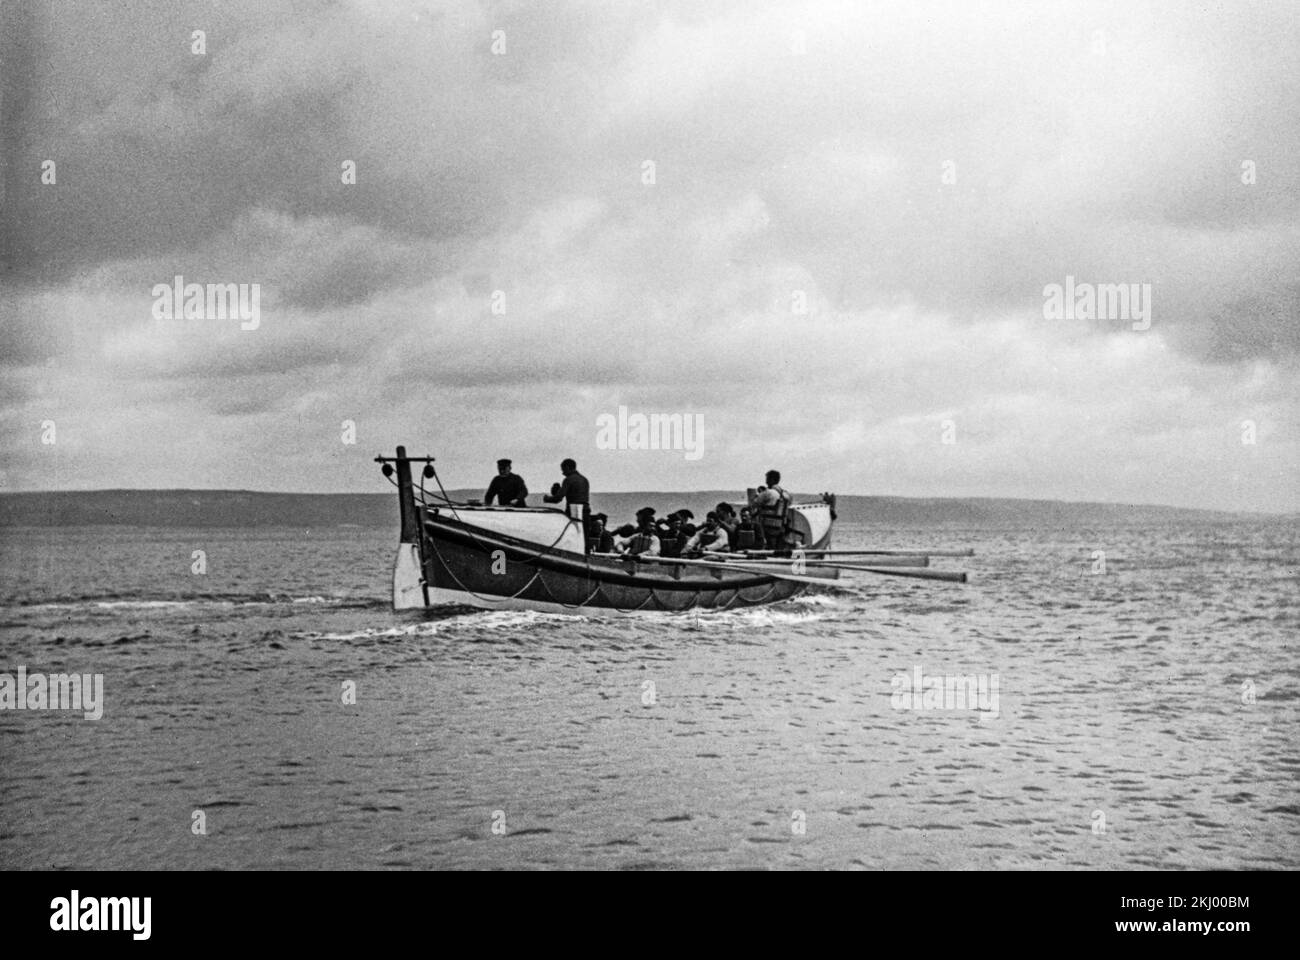 A late 19th or early 20th century black and white photograph showing a Life Boat being rowed by member of the  Royal National Lifeboat Institution, on coastal waters in England. Stock Photo